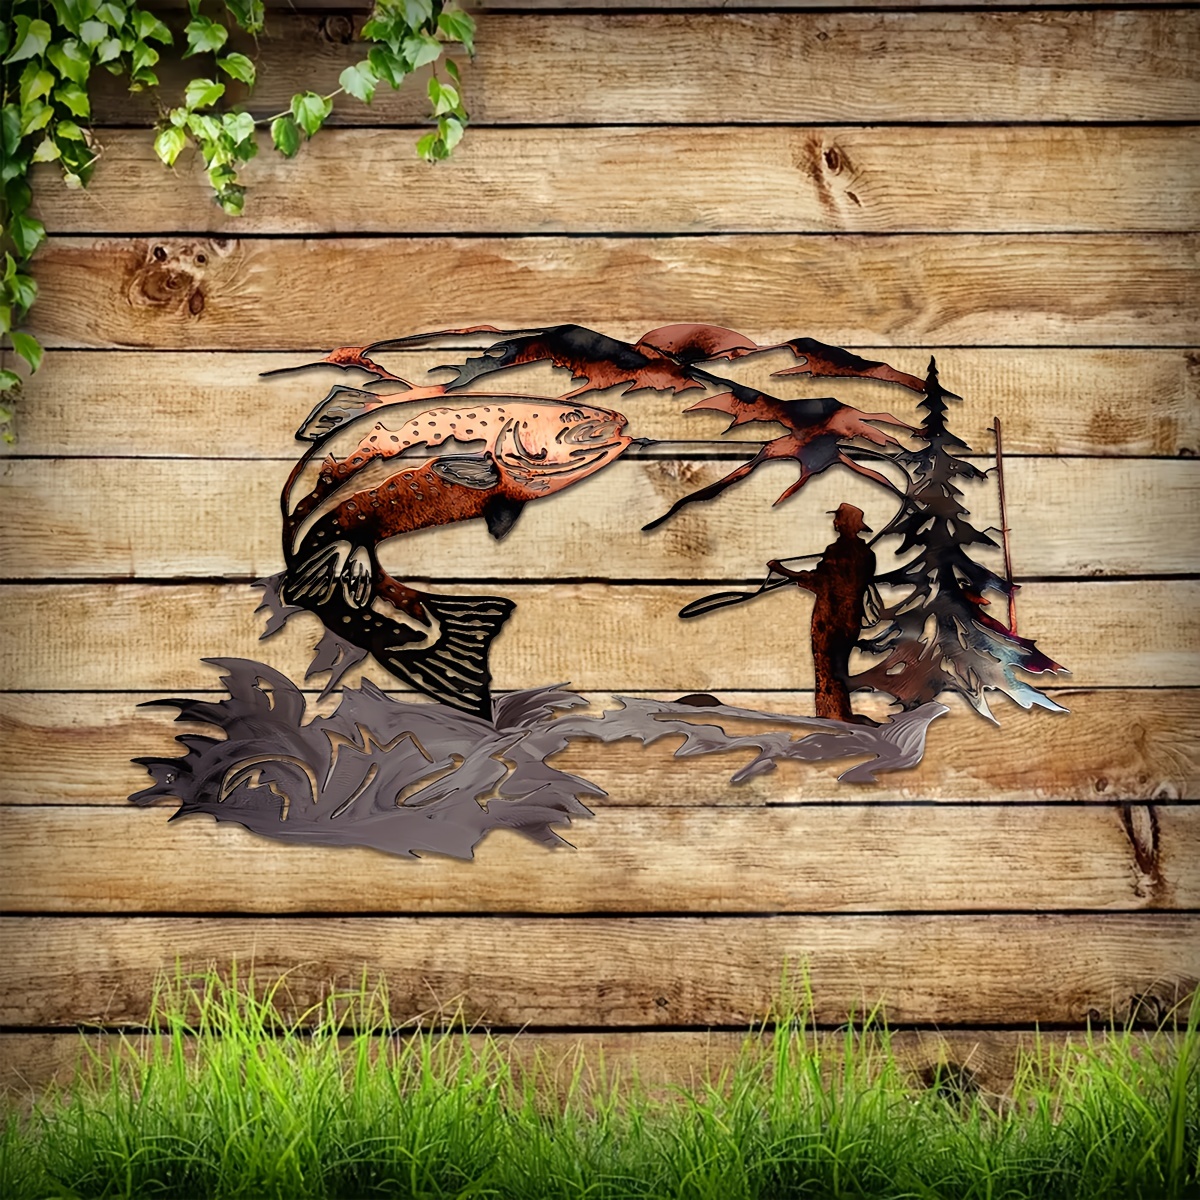 Hot Solo Mallard Hunting & Trout Fishing Scene Metal Wall Art Animal Shape Wall  Decal Vivid Decoration For Home Nds - Wall Stickers - AliExpress